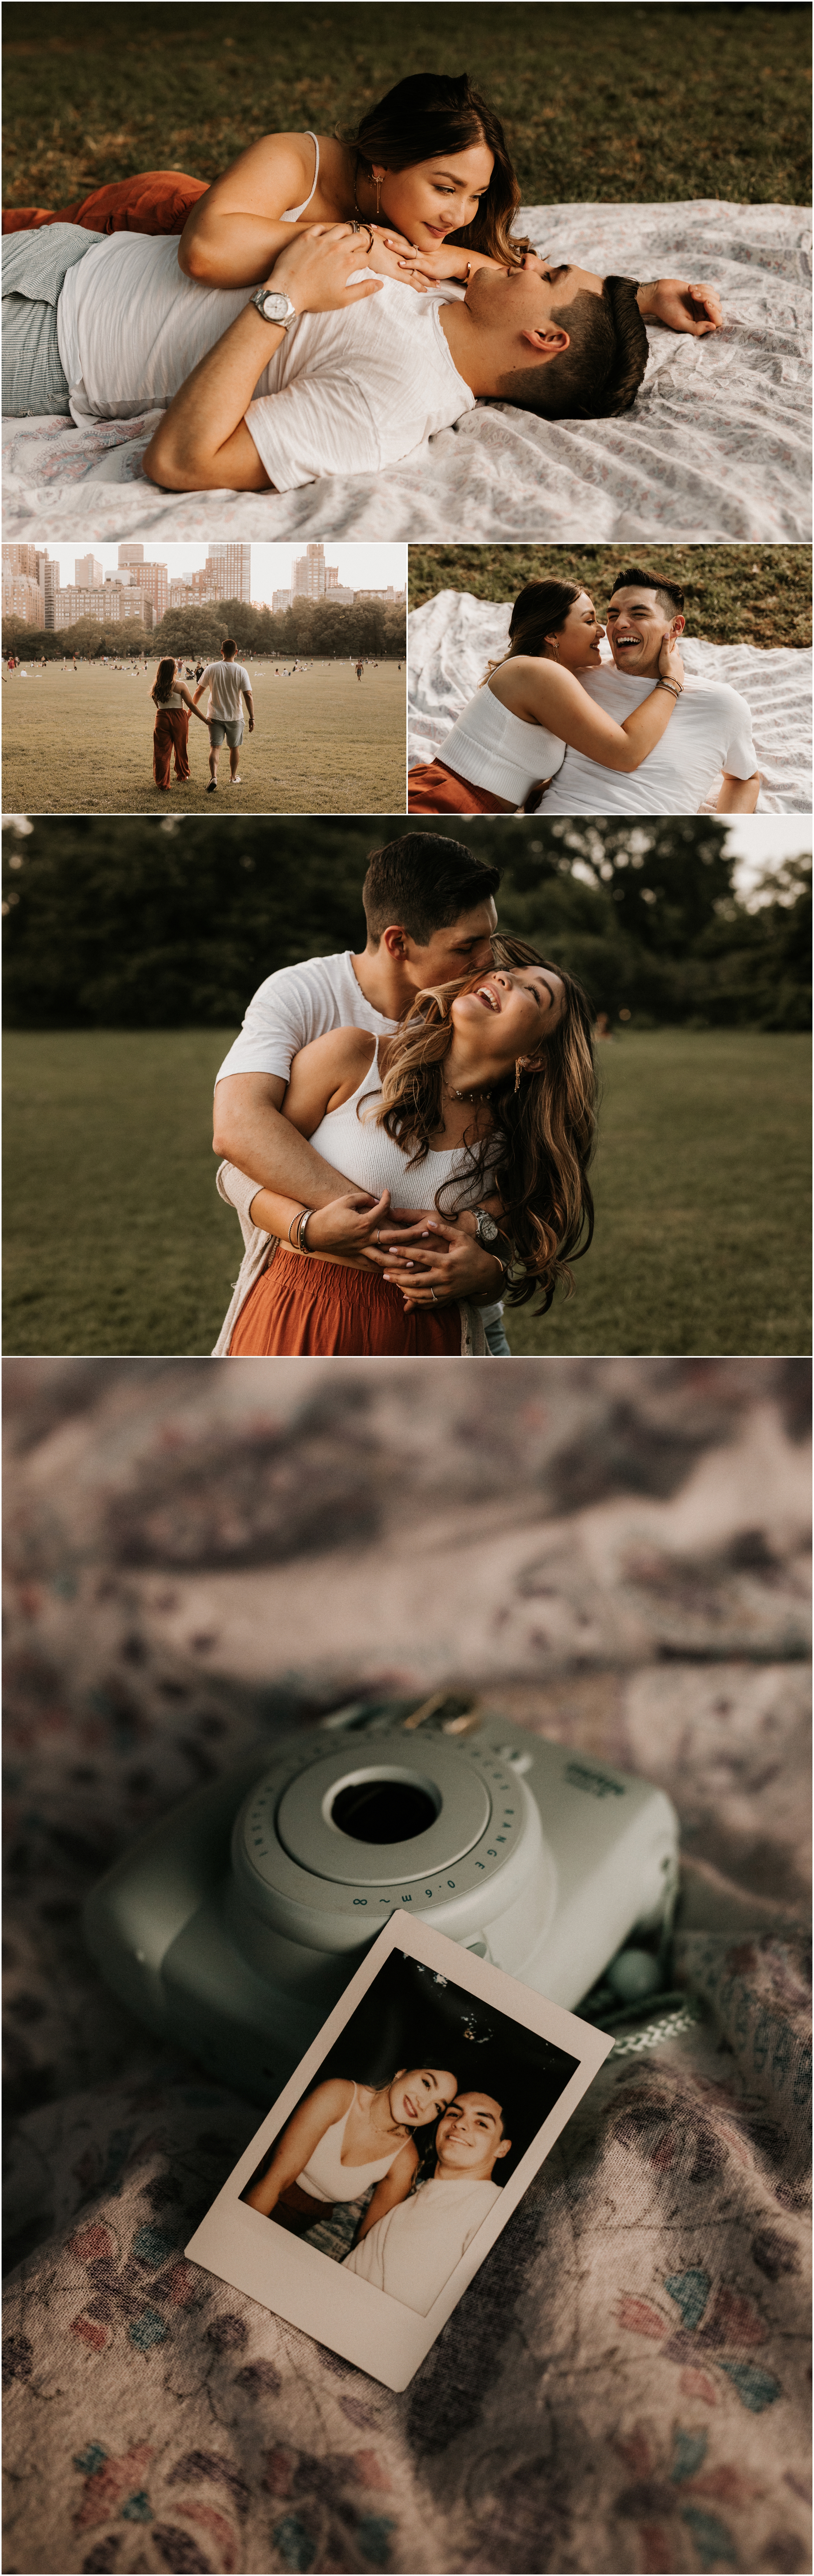 Summer Central Park NYC Engagement Session